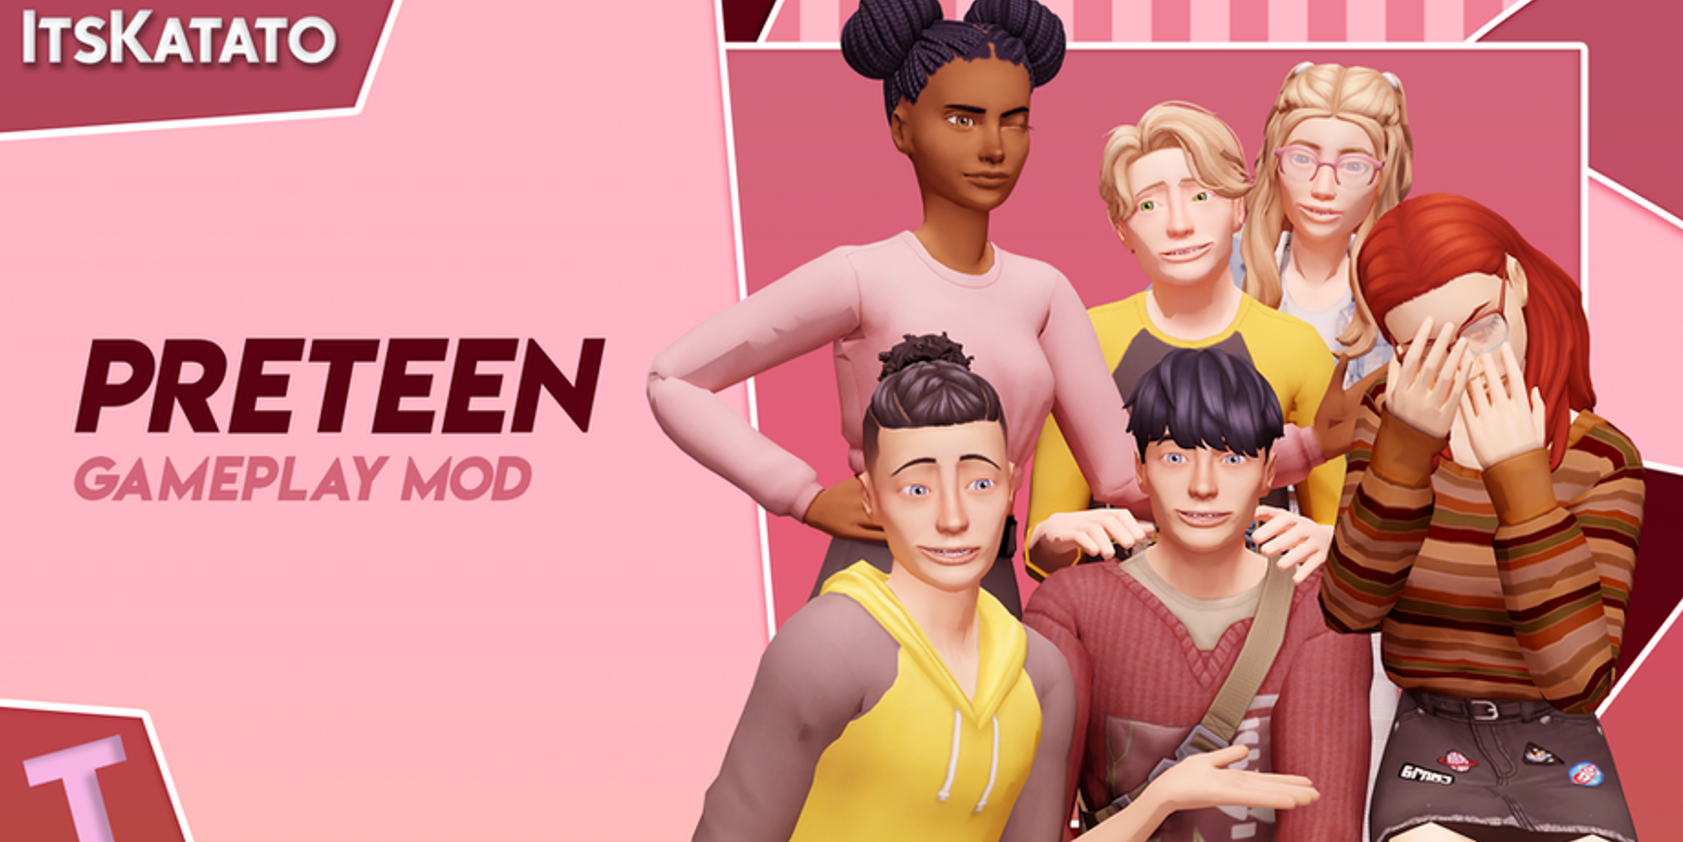 mood pack mod sims 4